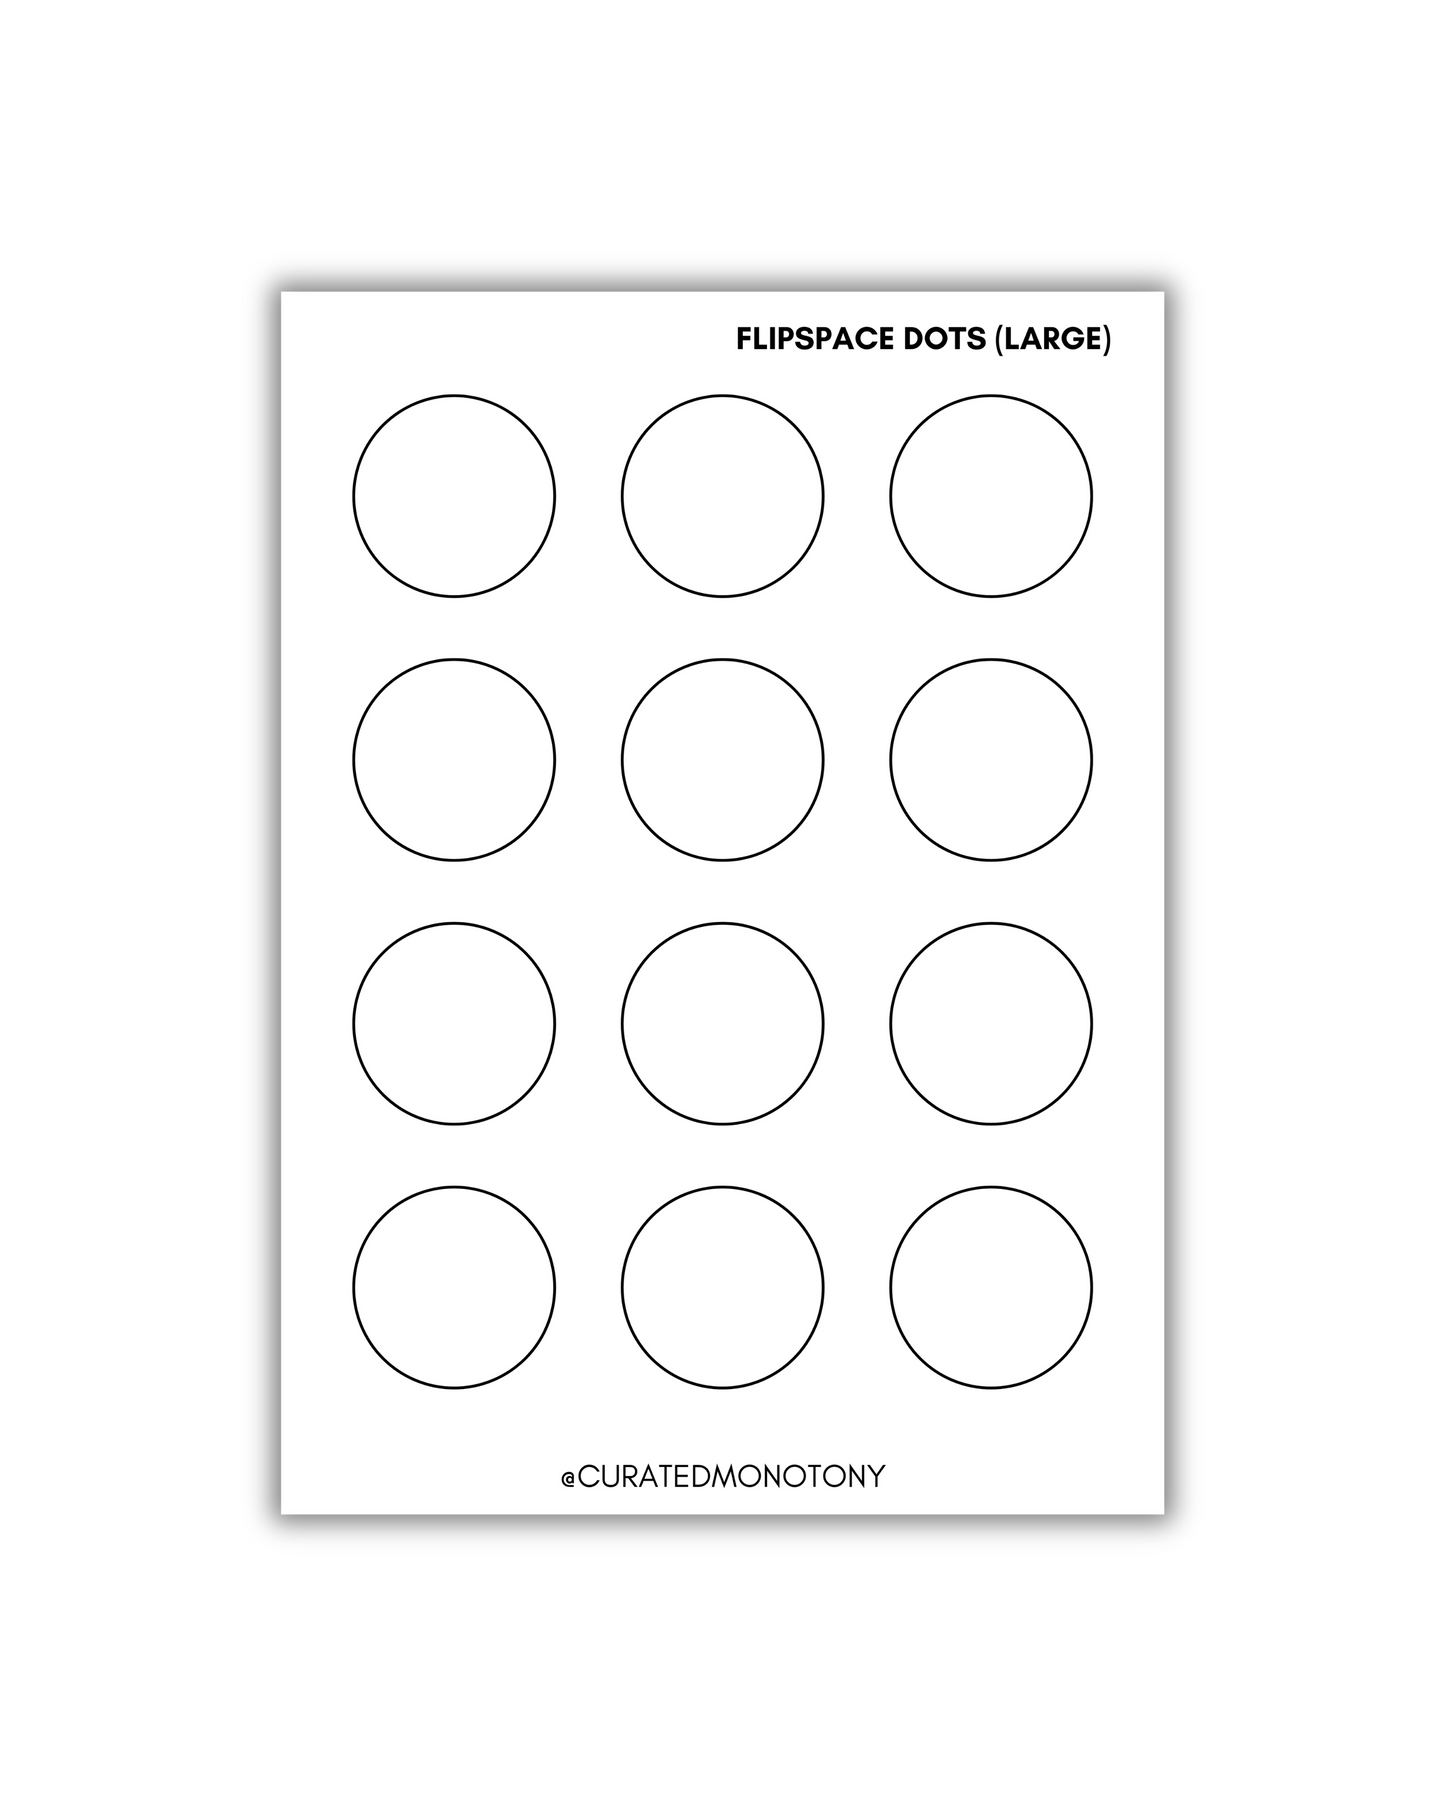 FlipSpace Dots (Large) Stickers